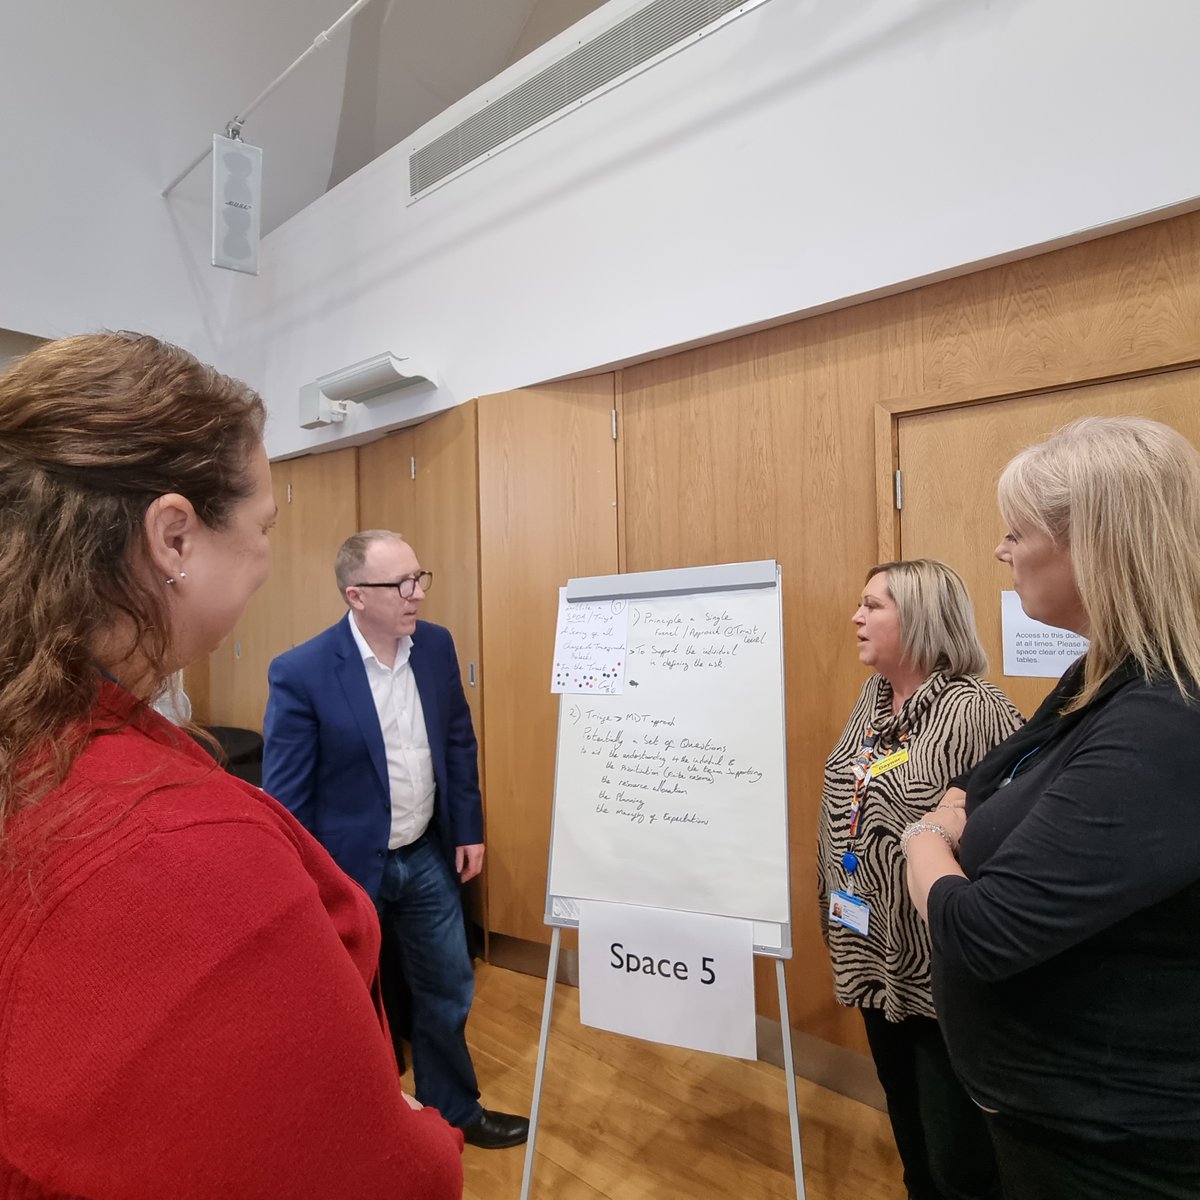 A dynamic day of collaborating, connecting, and conversing to bring about transformation. Through a shared space of dynamic dialogues, departments within the Trust joined together to look at the bigger picture of how we can implement transformation & improvement effectively.🎯📈